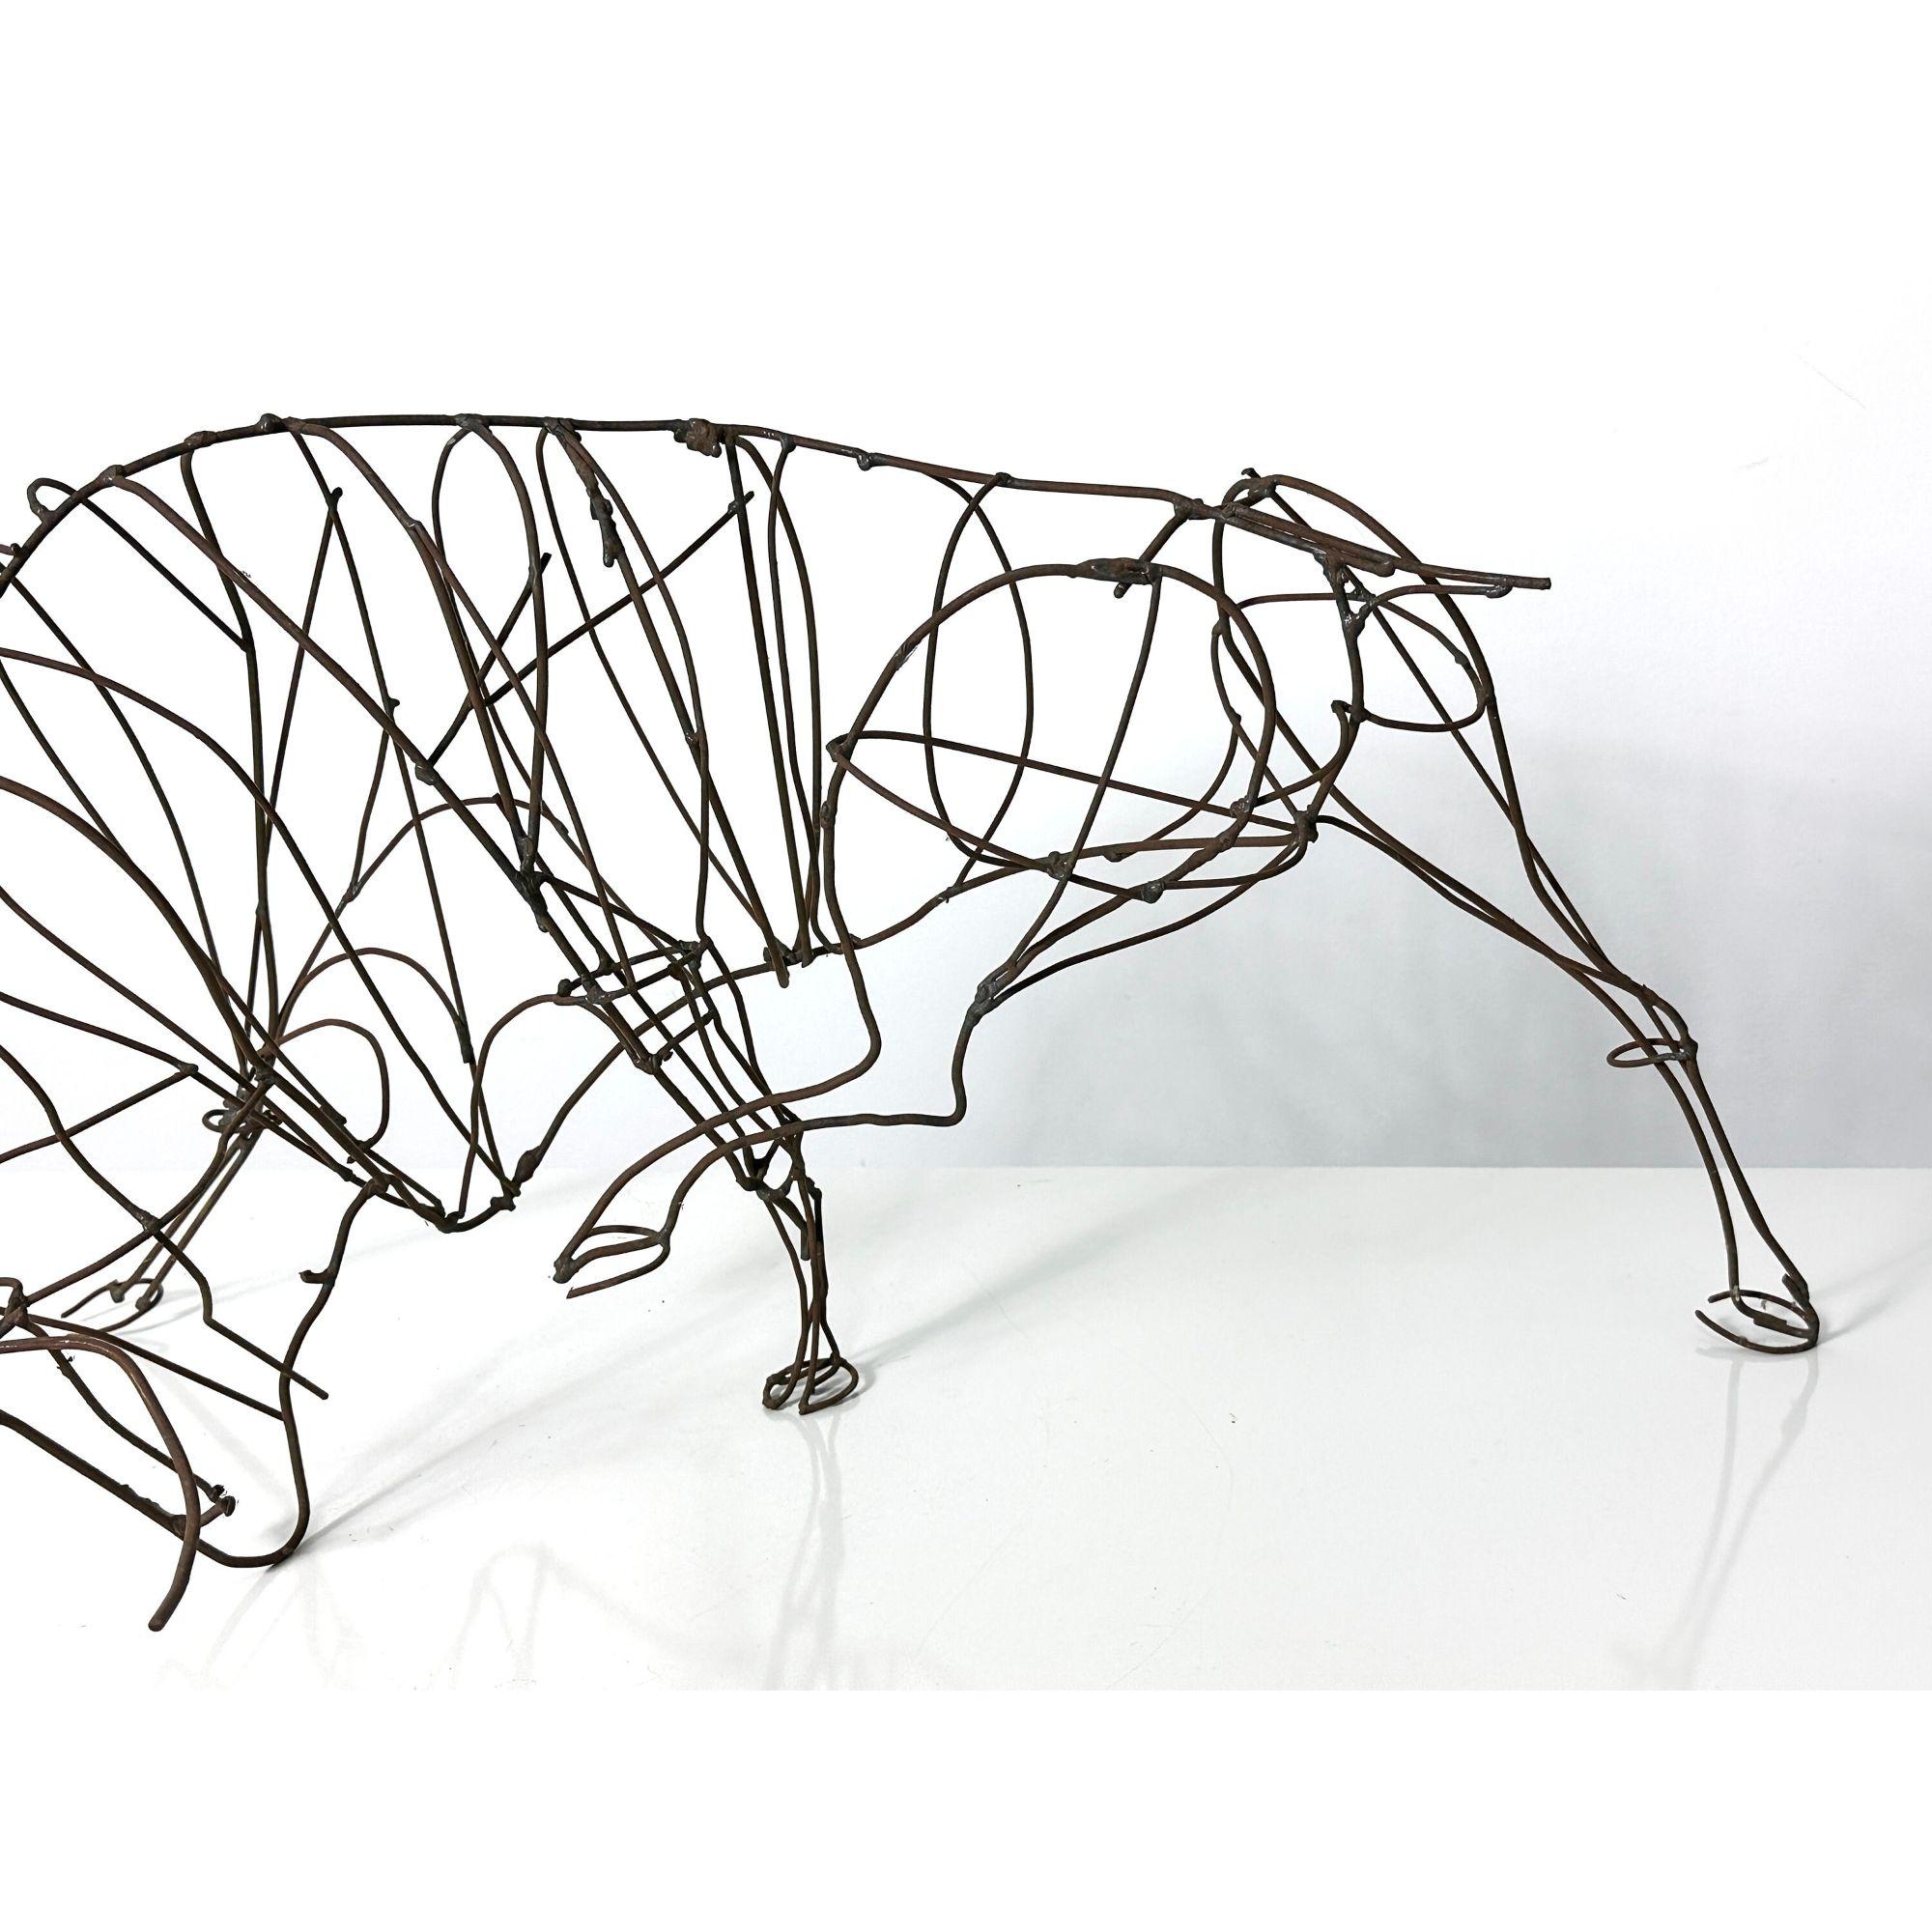 Welded Large Mid Century Modern Abstract Wire Bull Sculpture by Fred Scott circa 1960s